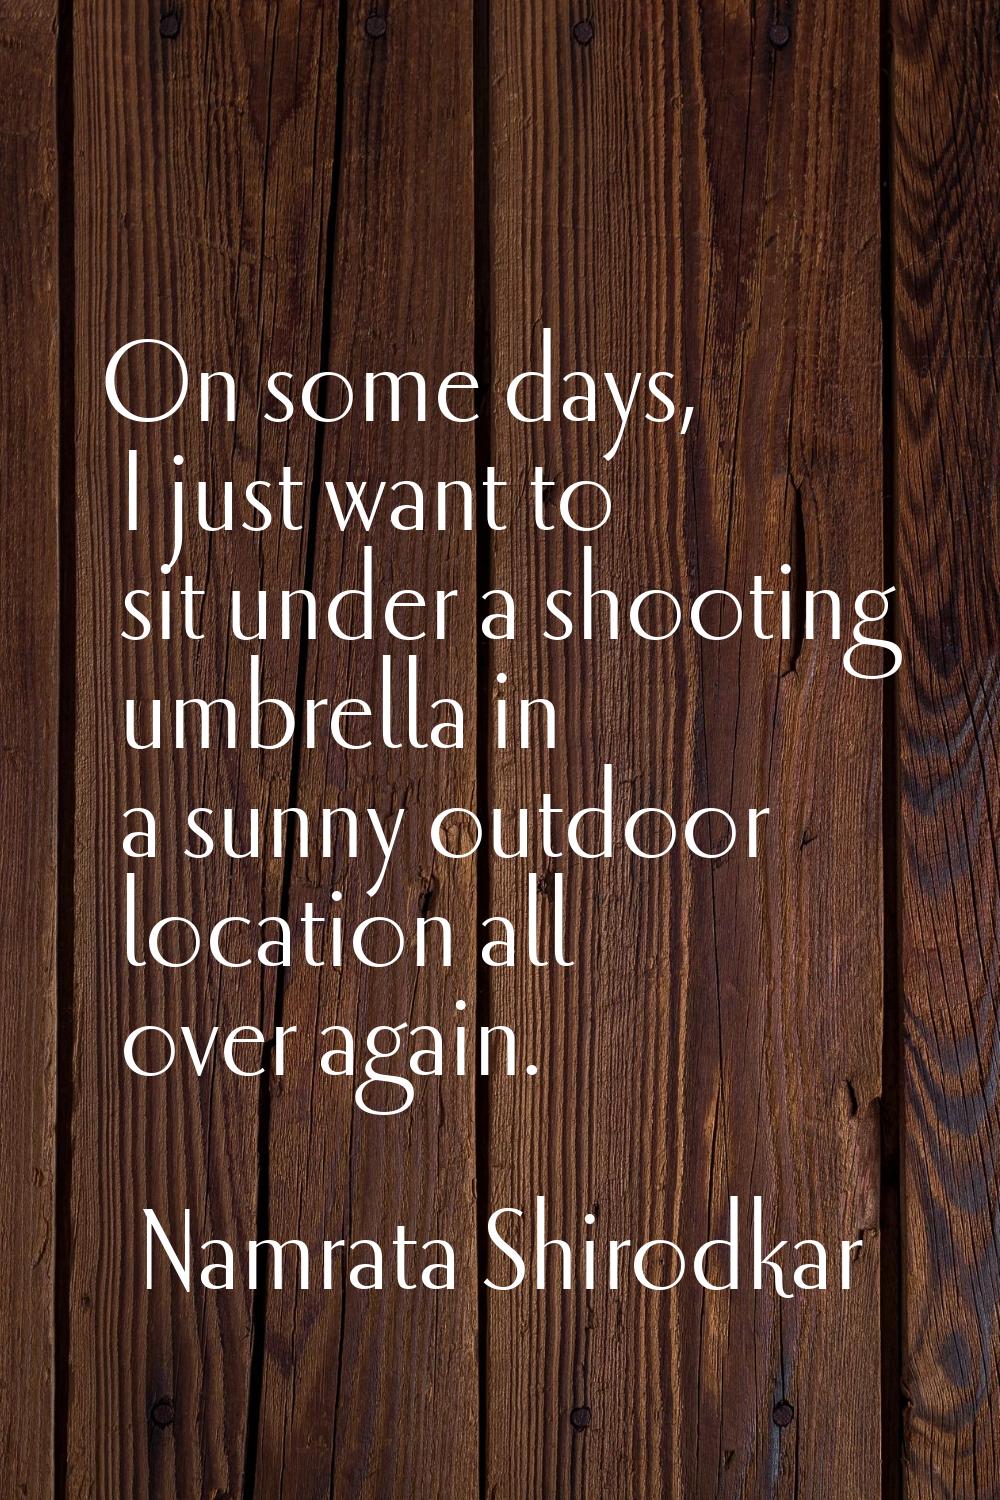 On some days, I just want to sit under a shooting umbrella in a sunny outdoor location all over aga